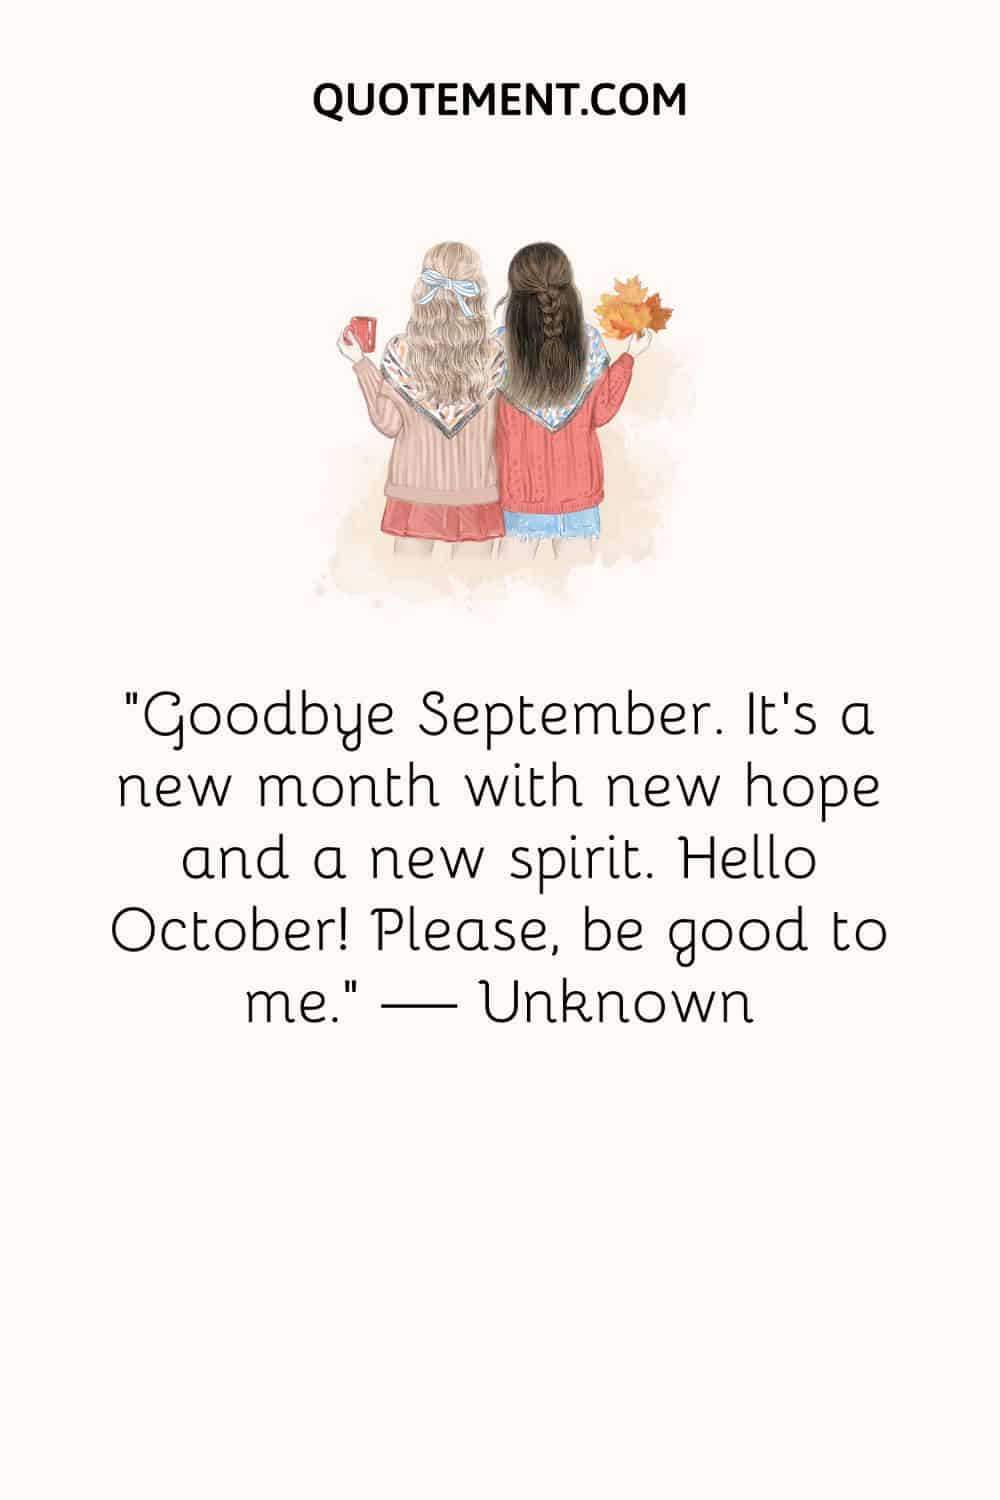 Goodbye September. It’s a new month with new hope and a new spirit. Hello October! Please, be good to me.